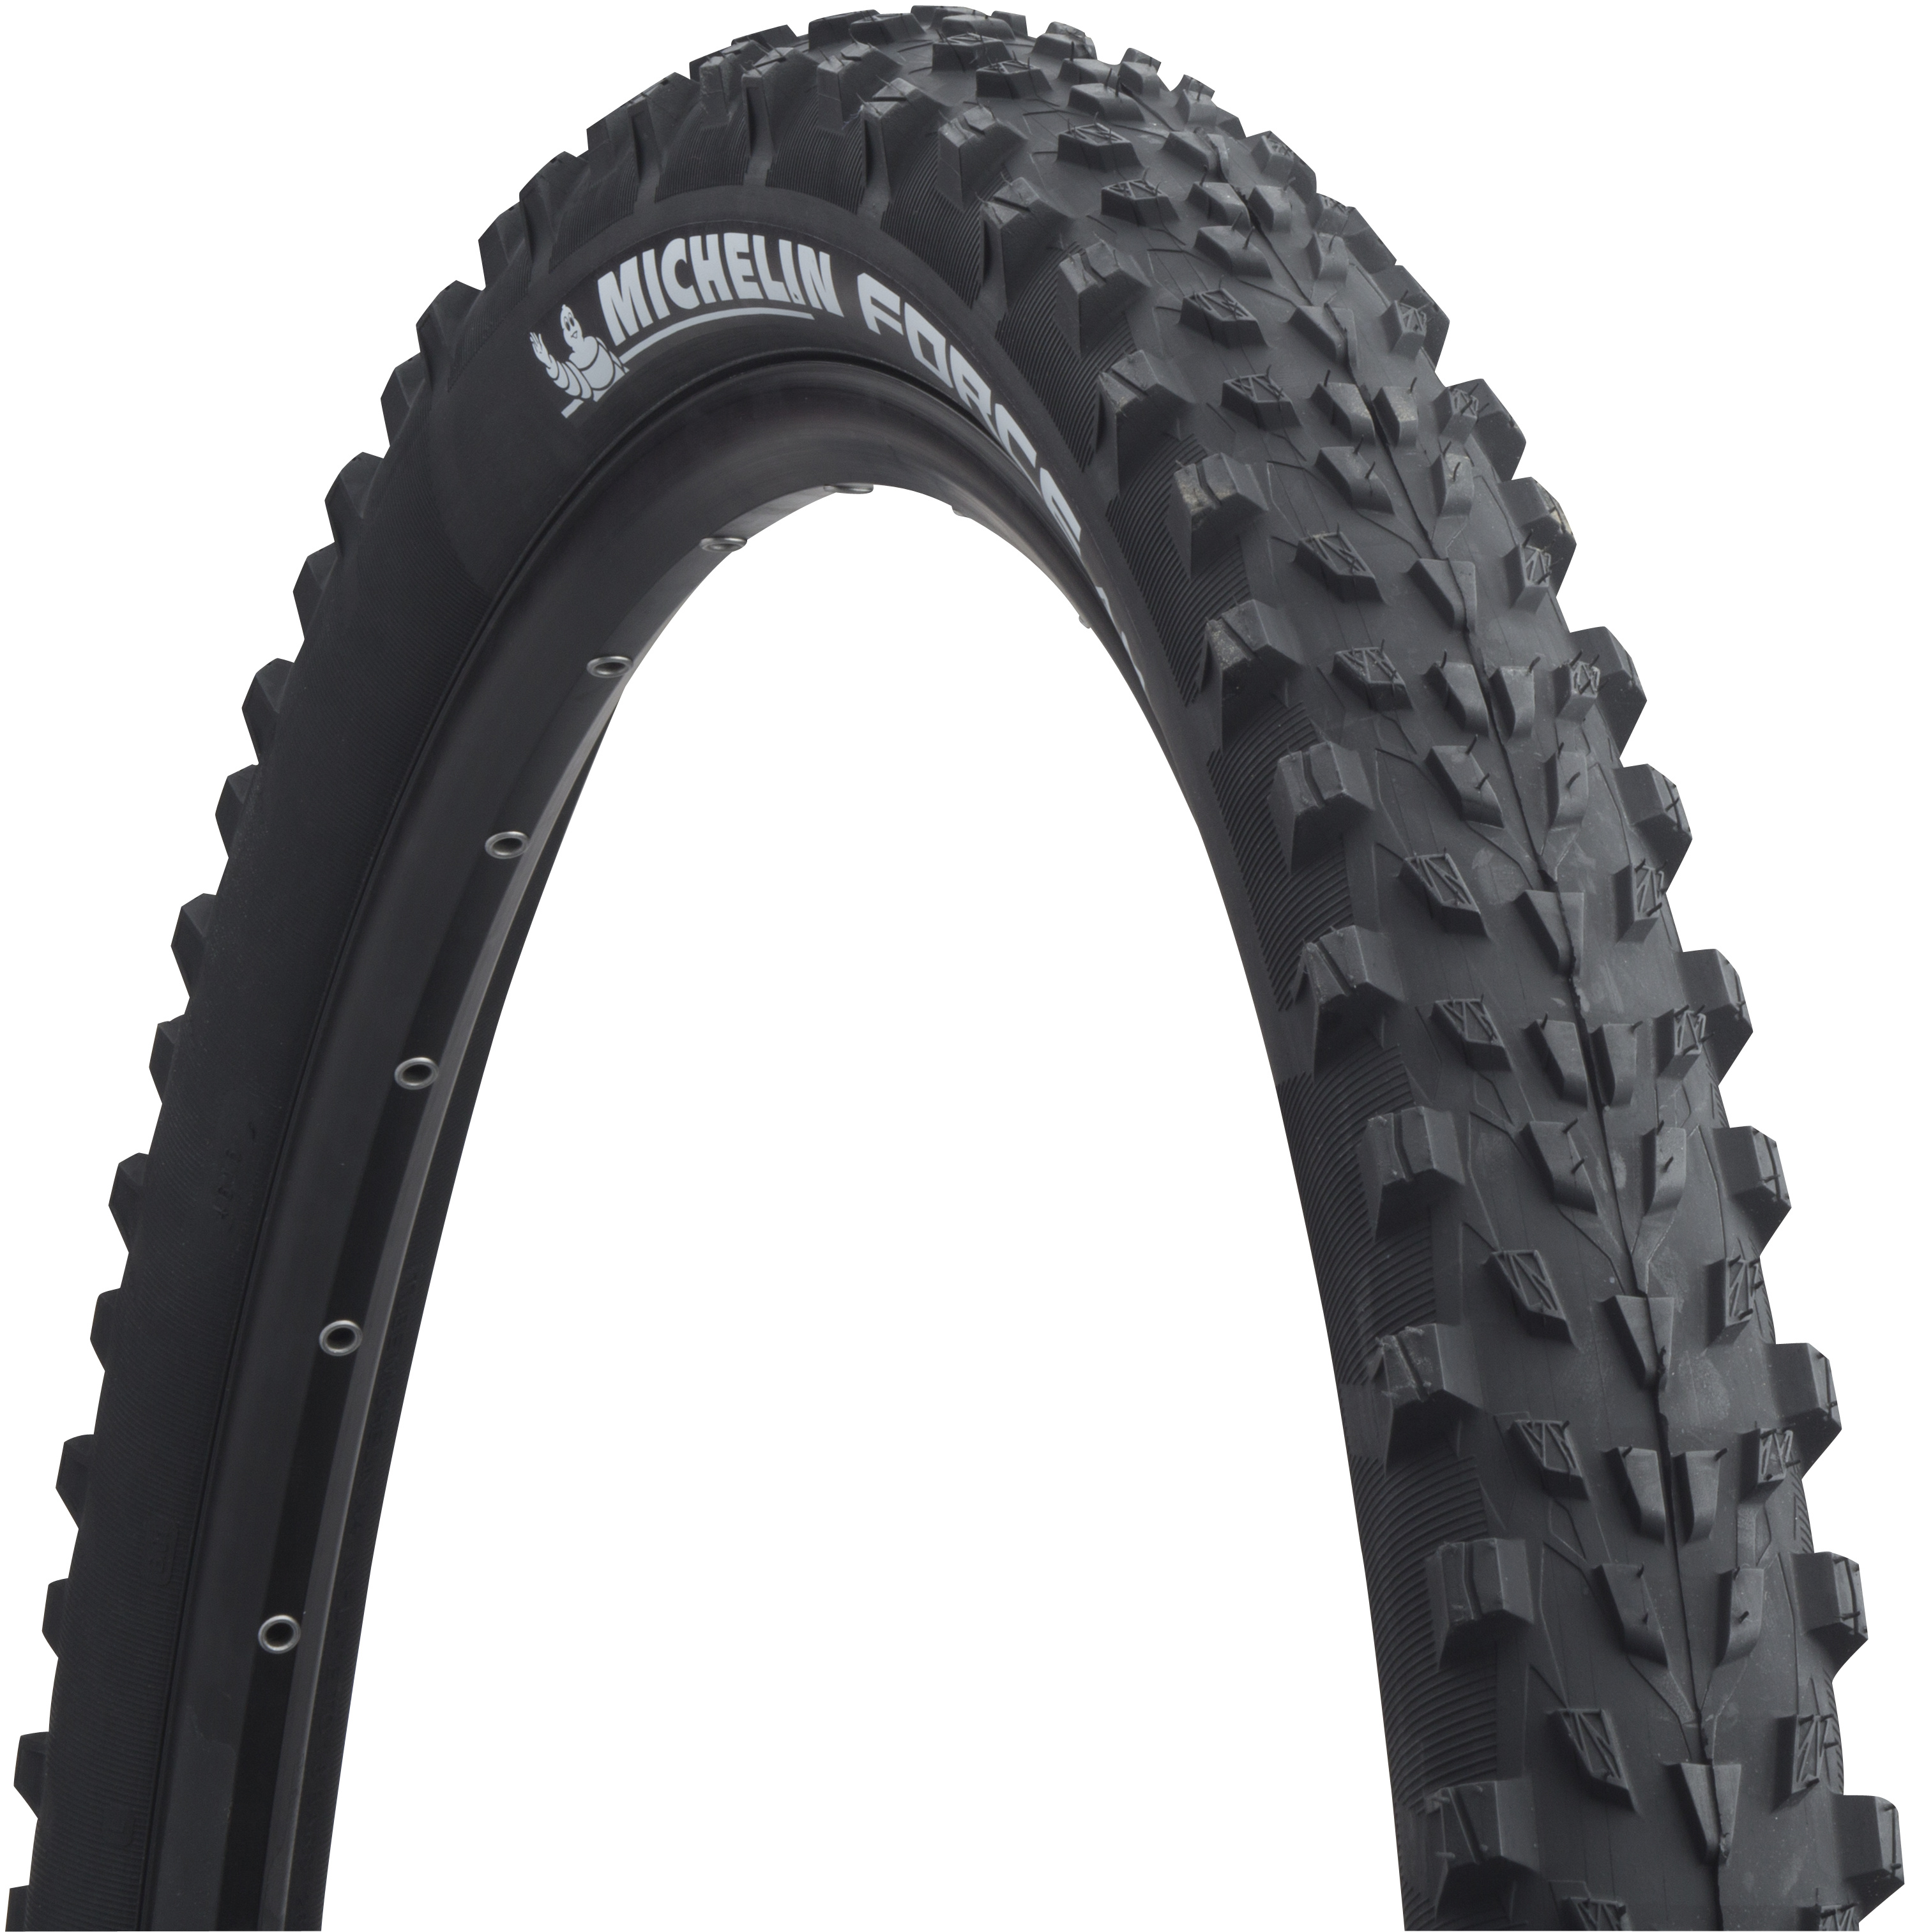 Win a pair of MICHELIN® Force AM Tires